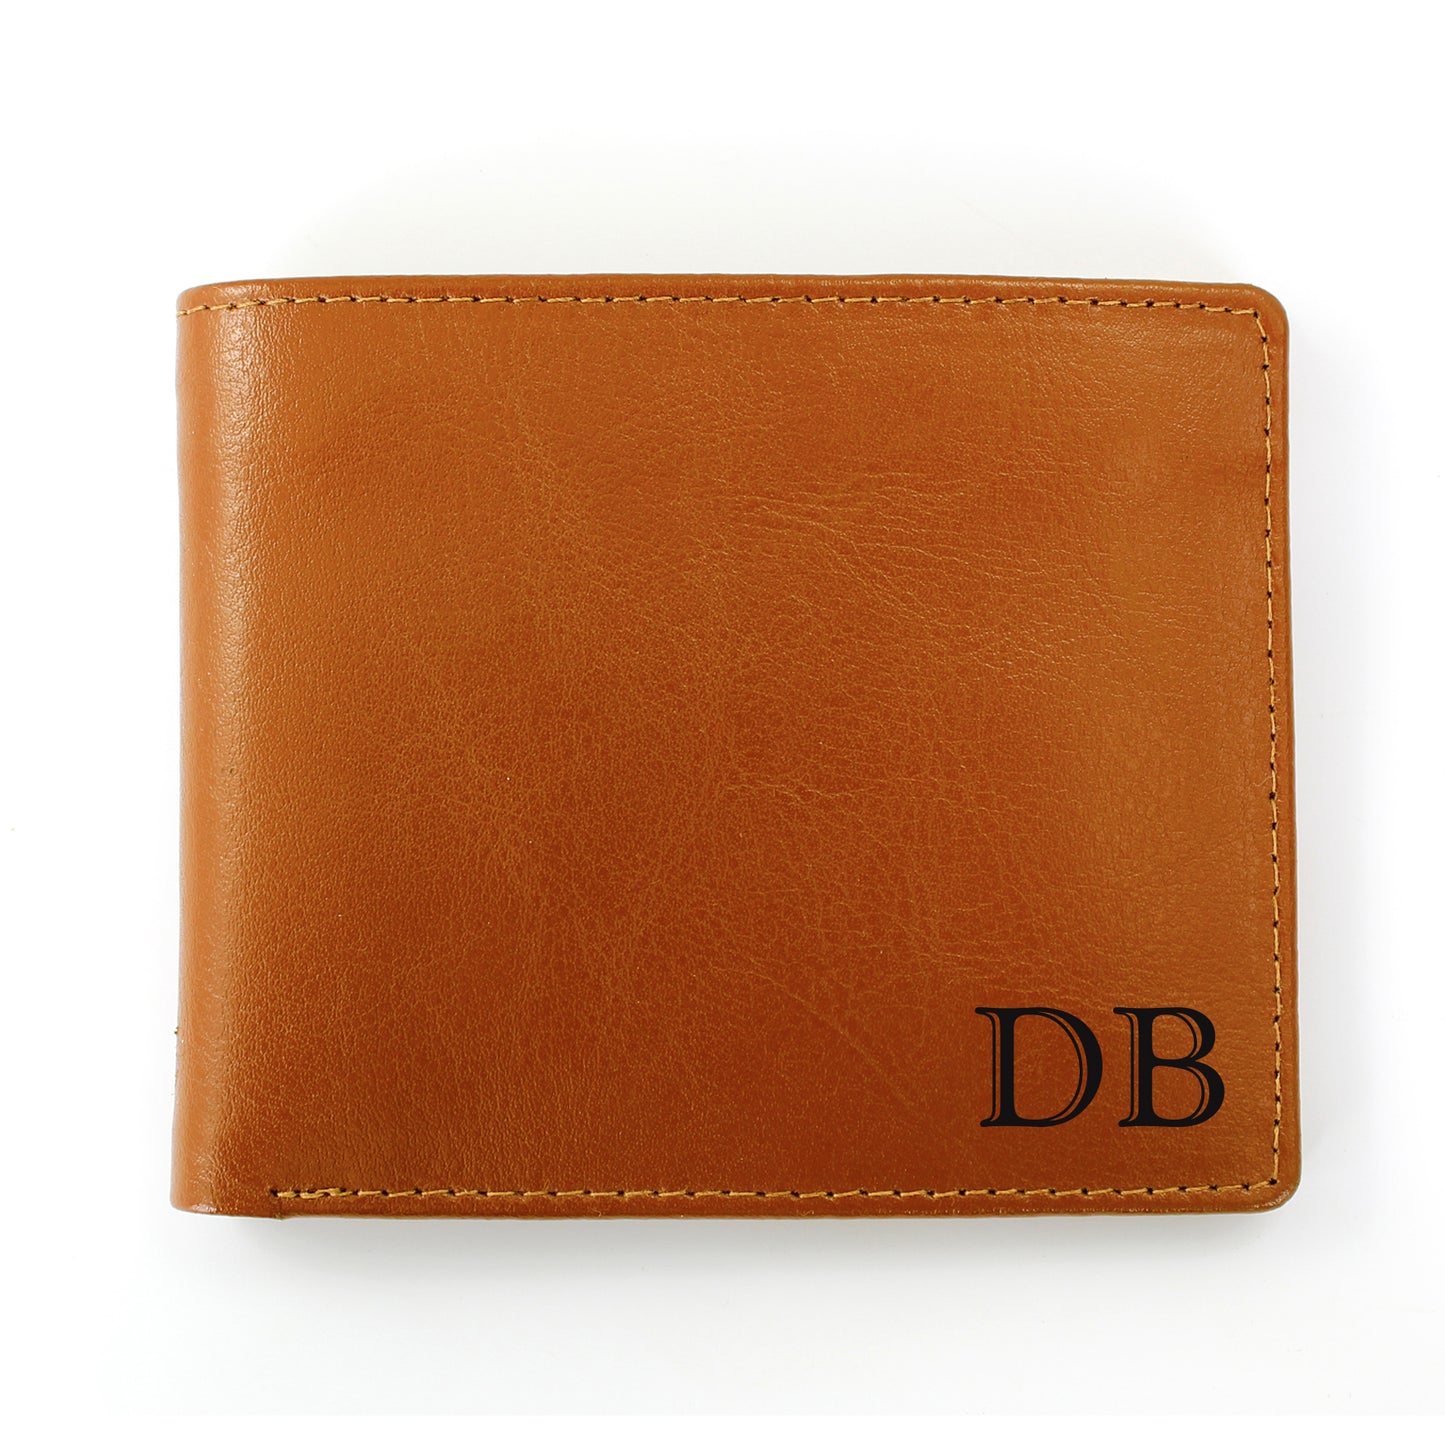 Personalised Initials Tan Leather Wallet - Personalise It!